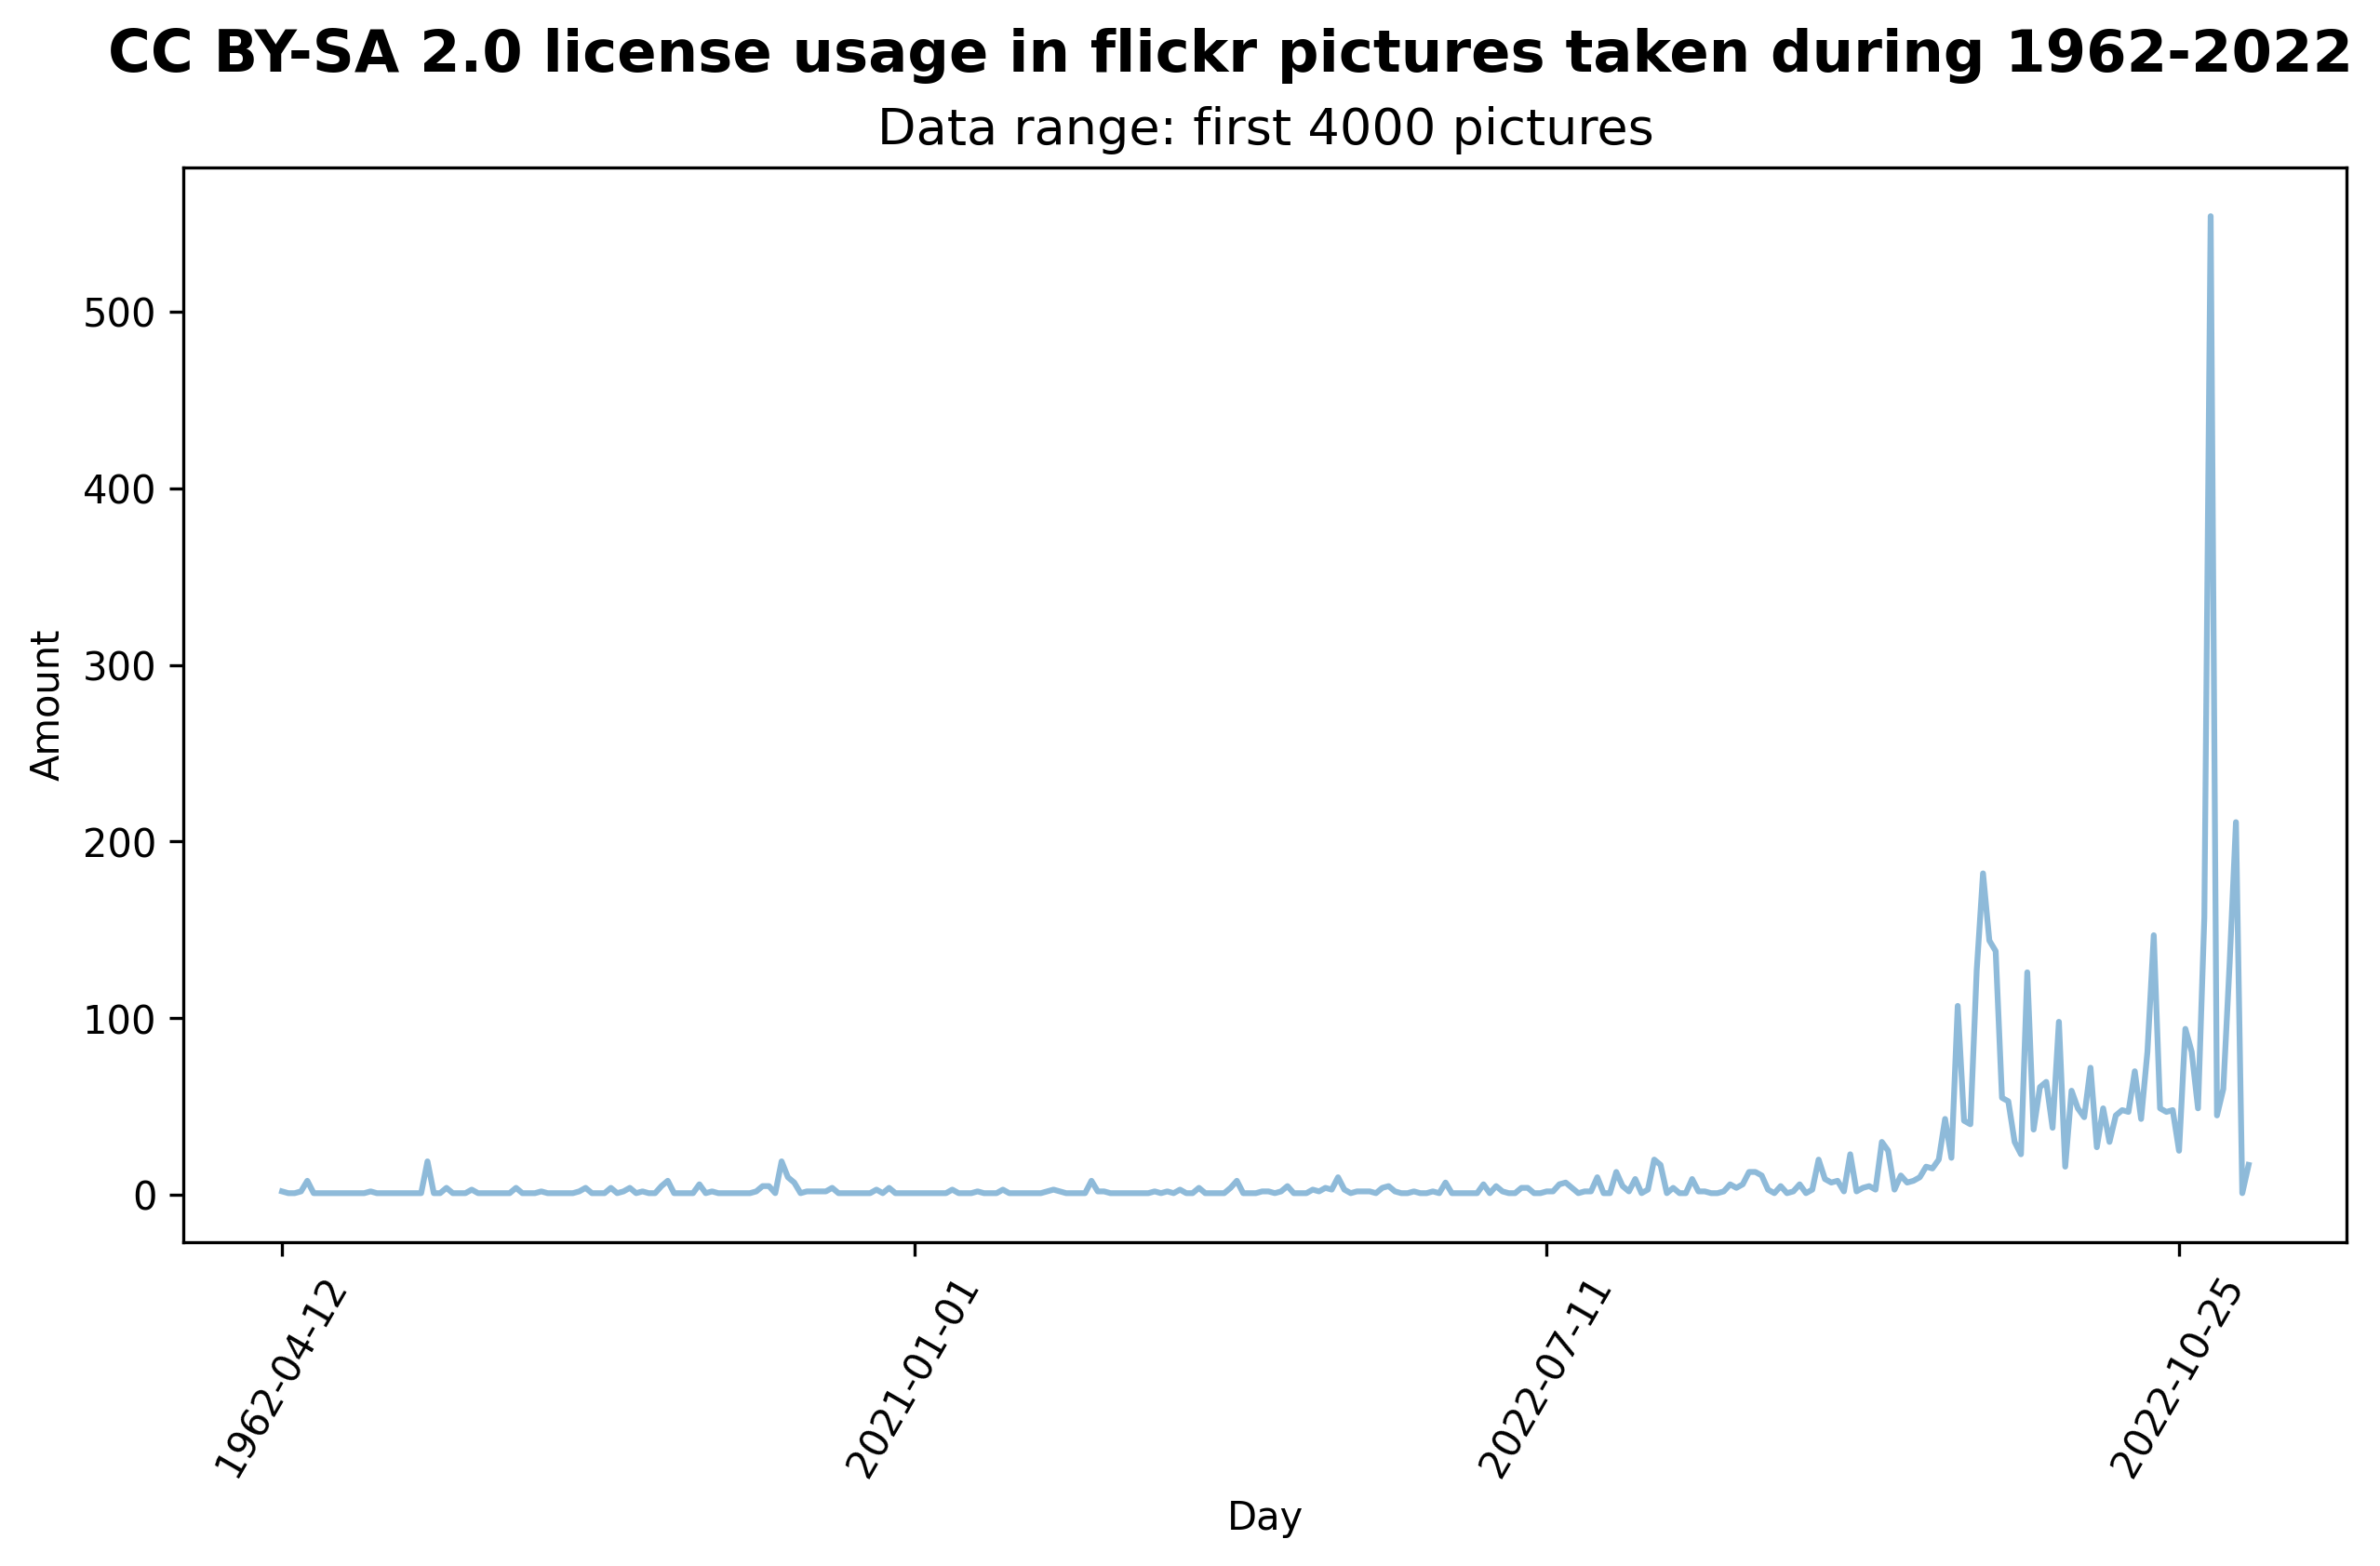 CC BY-SA 2.0 license usage in Flickr pictures taken during 1962-2022